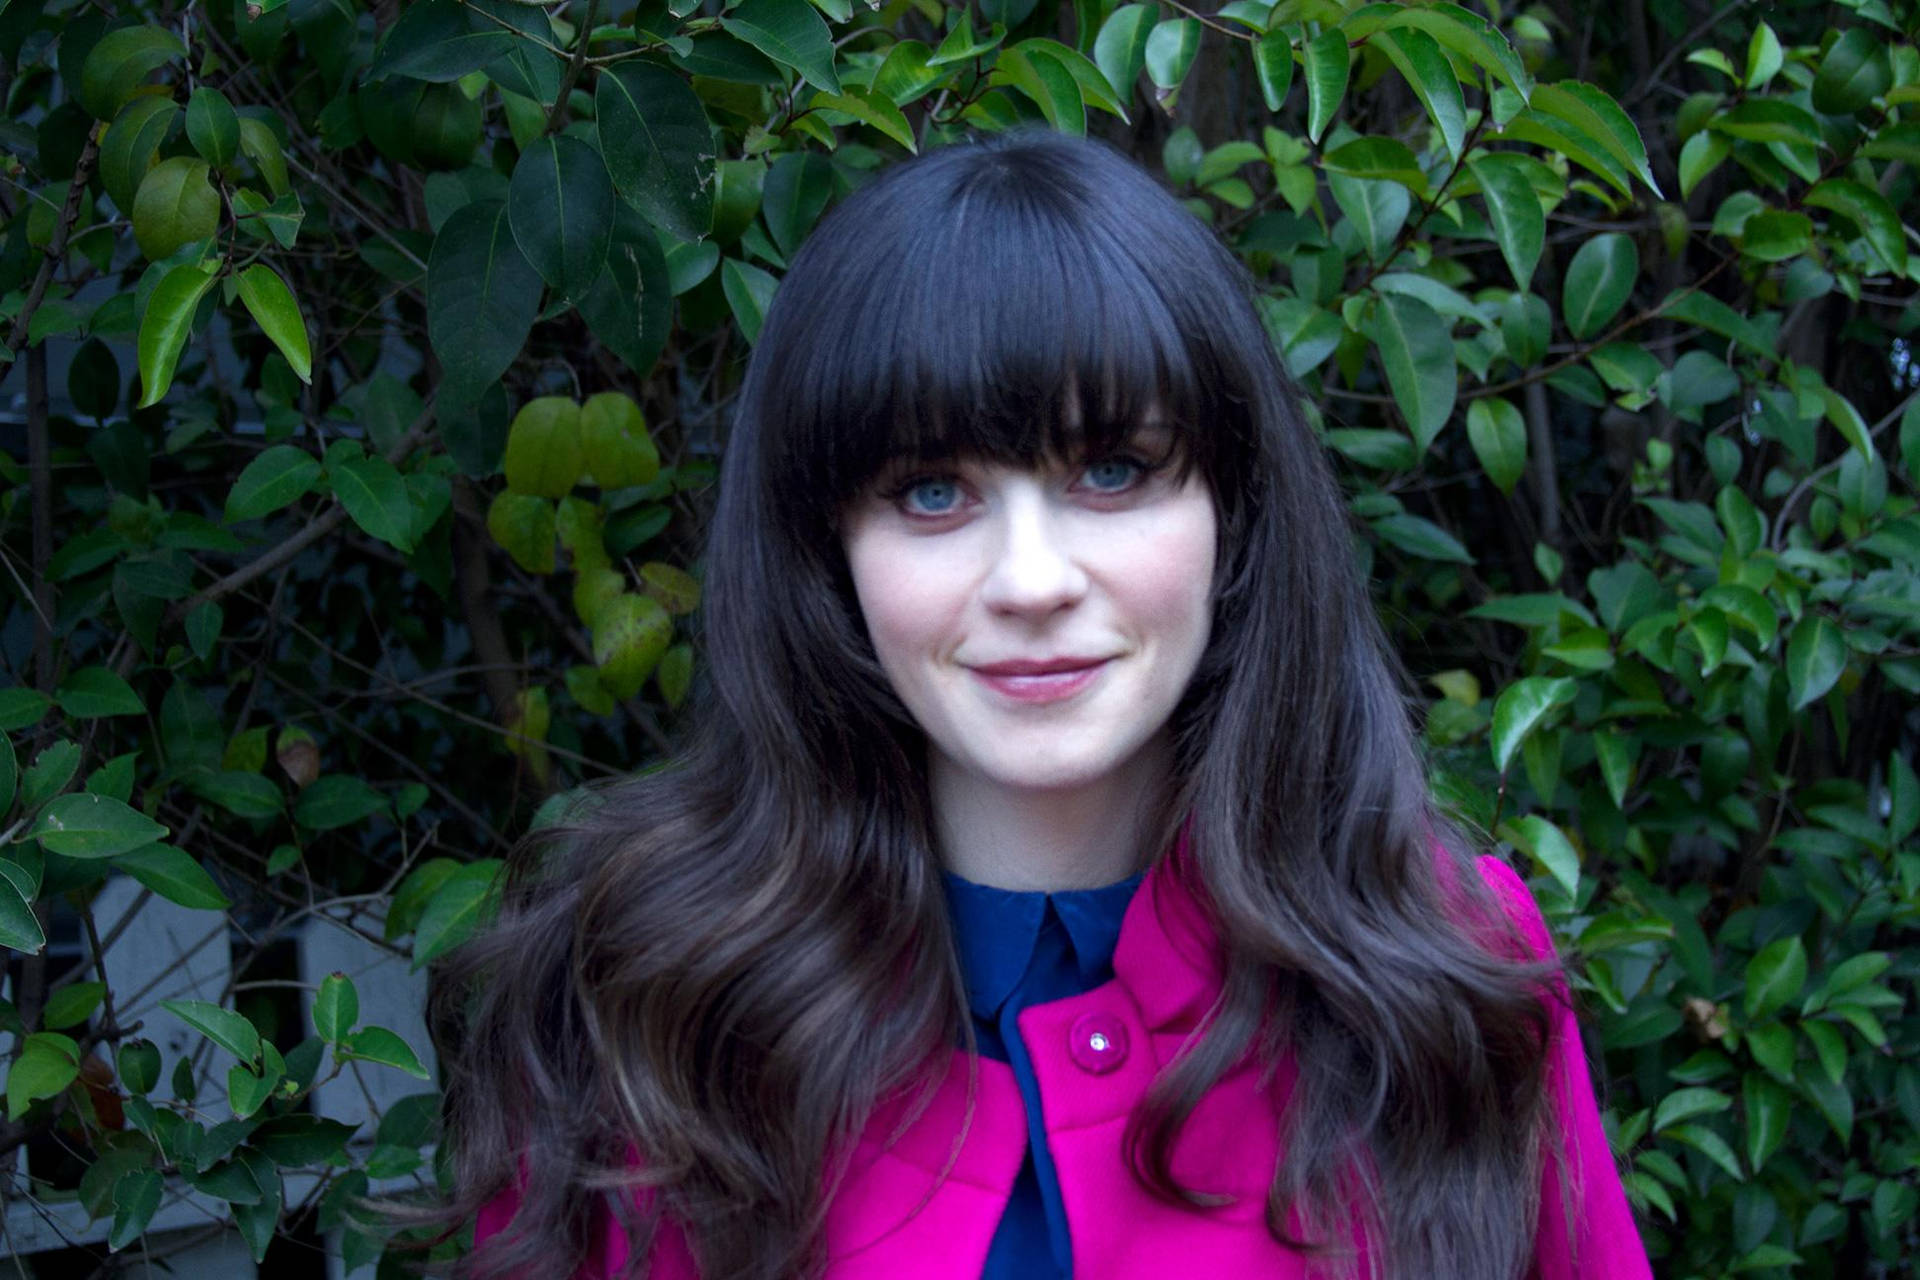 Zooey Deschanel Pink And Blue Outfit With Plants